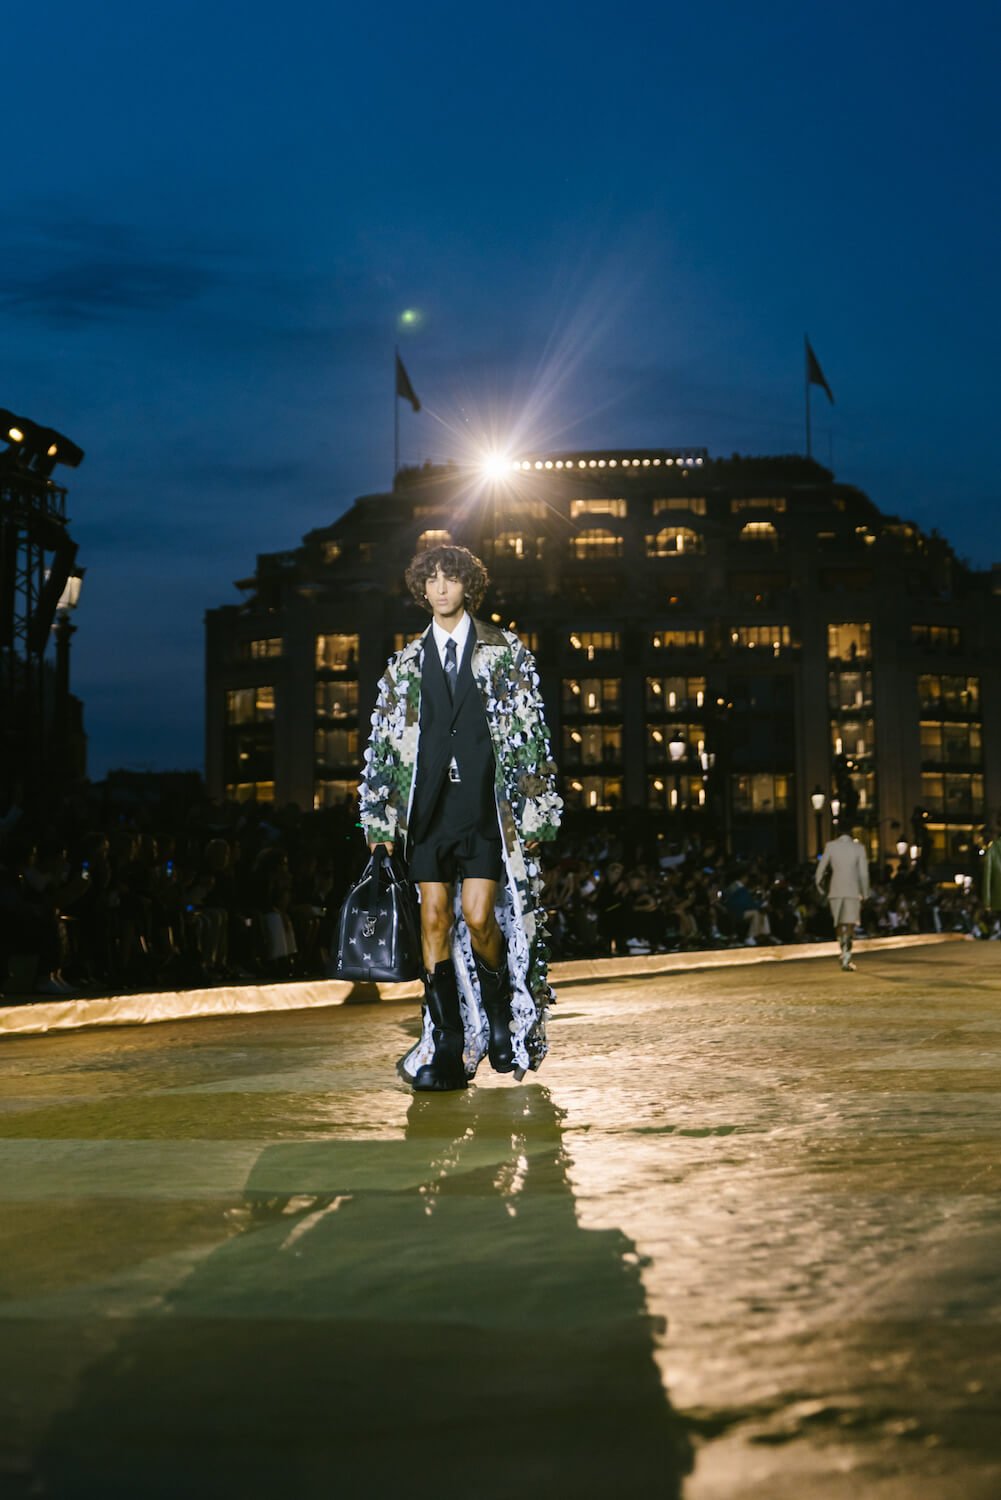 Pharrell Williams Hosts Jay-Z and Clipse at First Louis Vuitton